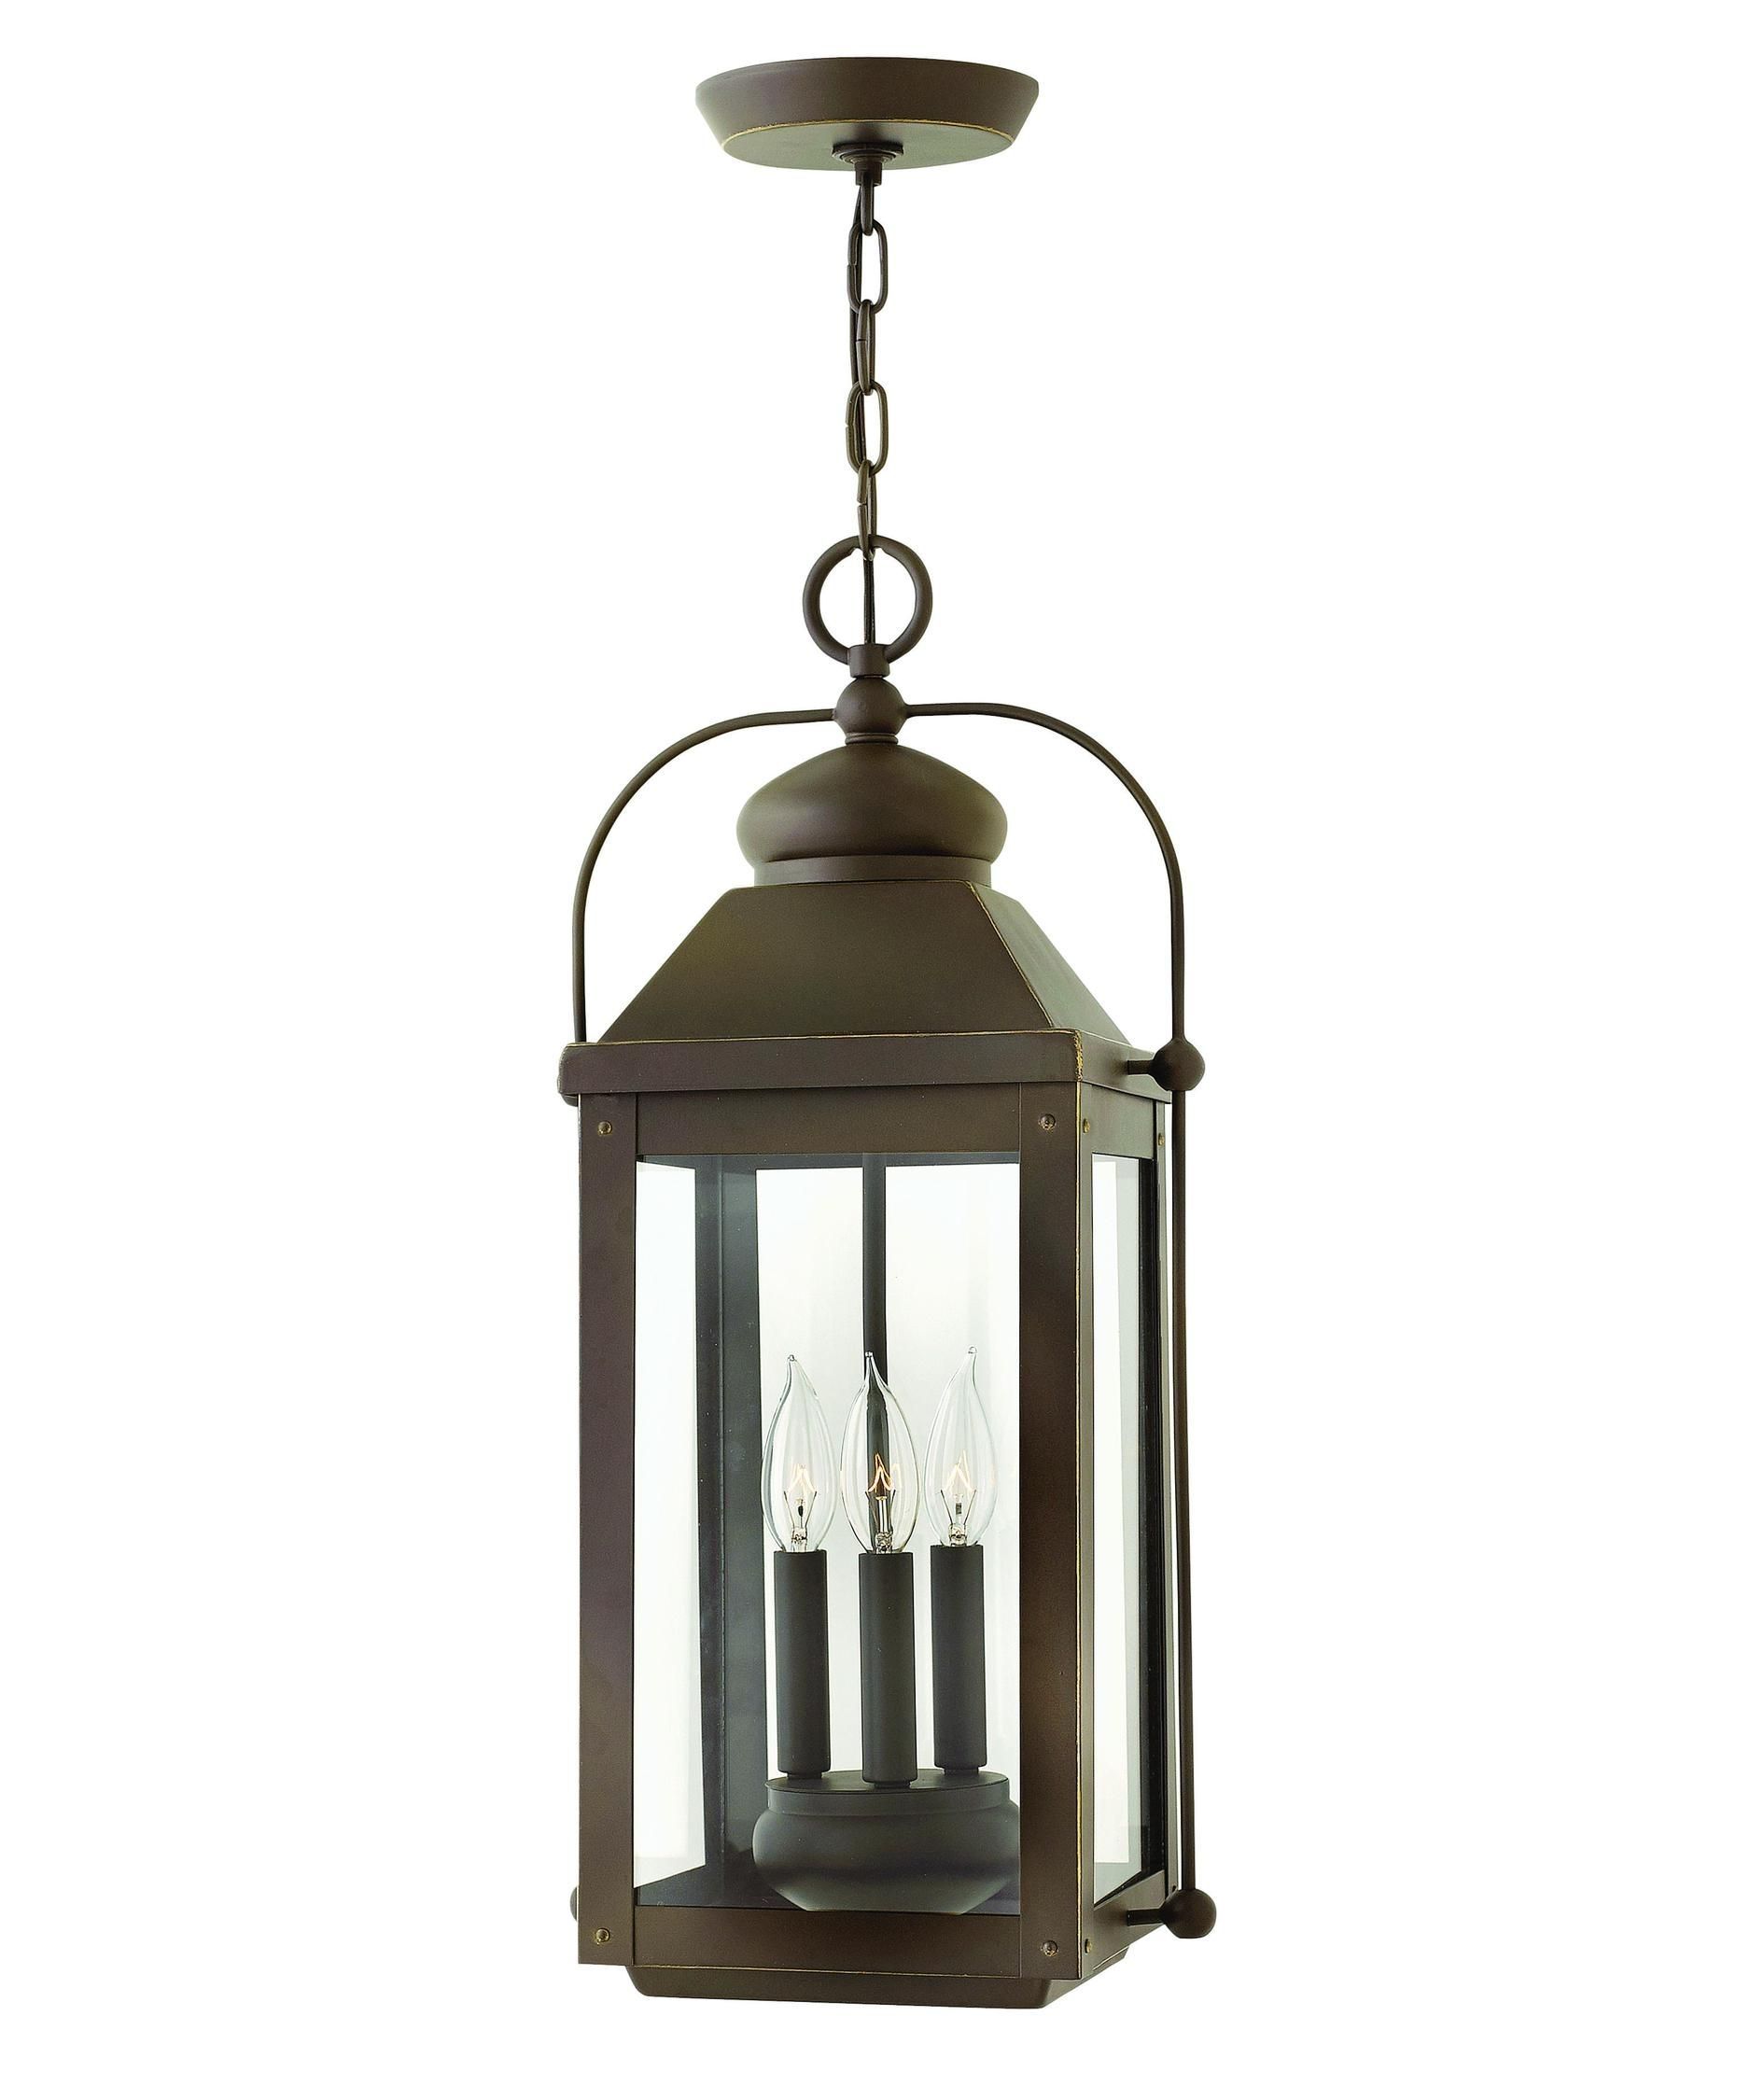 Hinkley Lighting Anchorage 11 Inch Wide 3 Light Outdoor Hanging Inside Hanging Porch Hinkley Lighting (Photo 6 of 15)